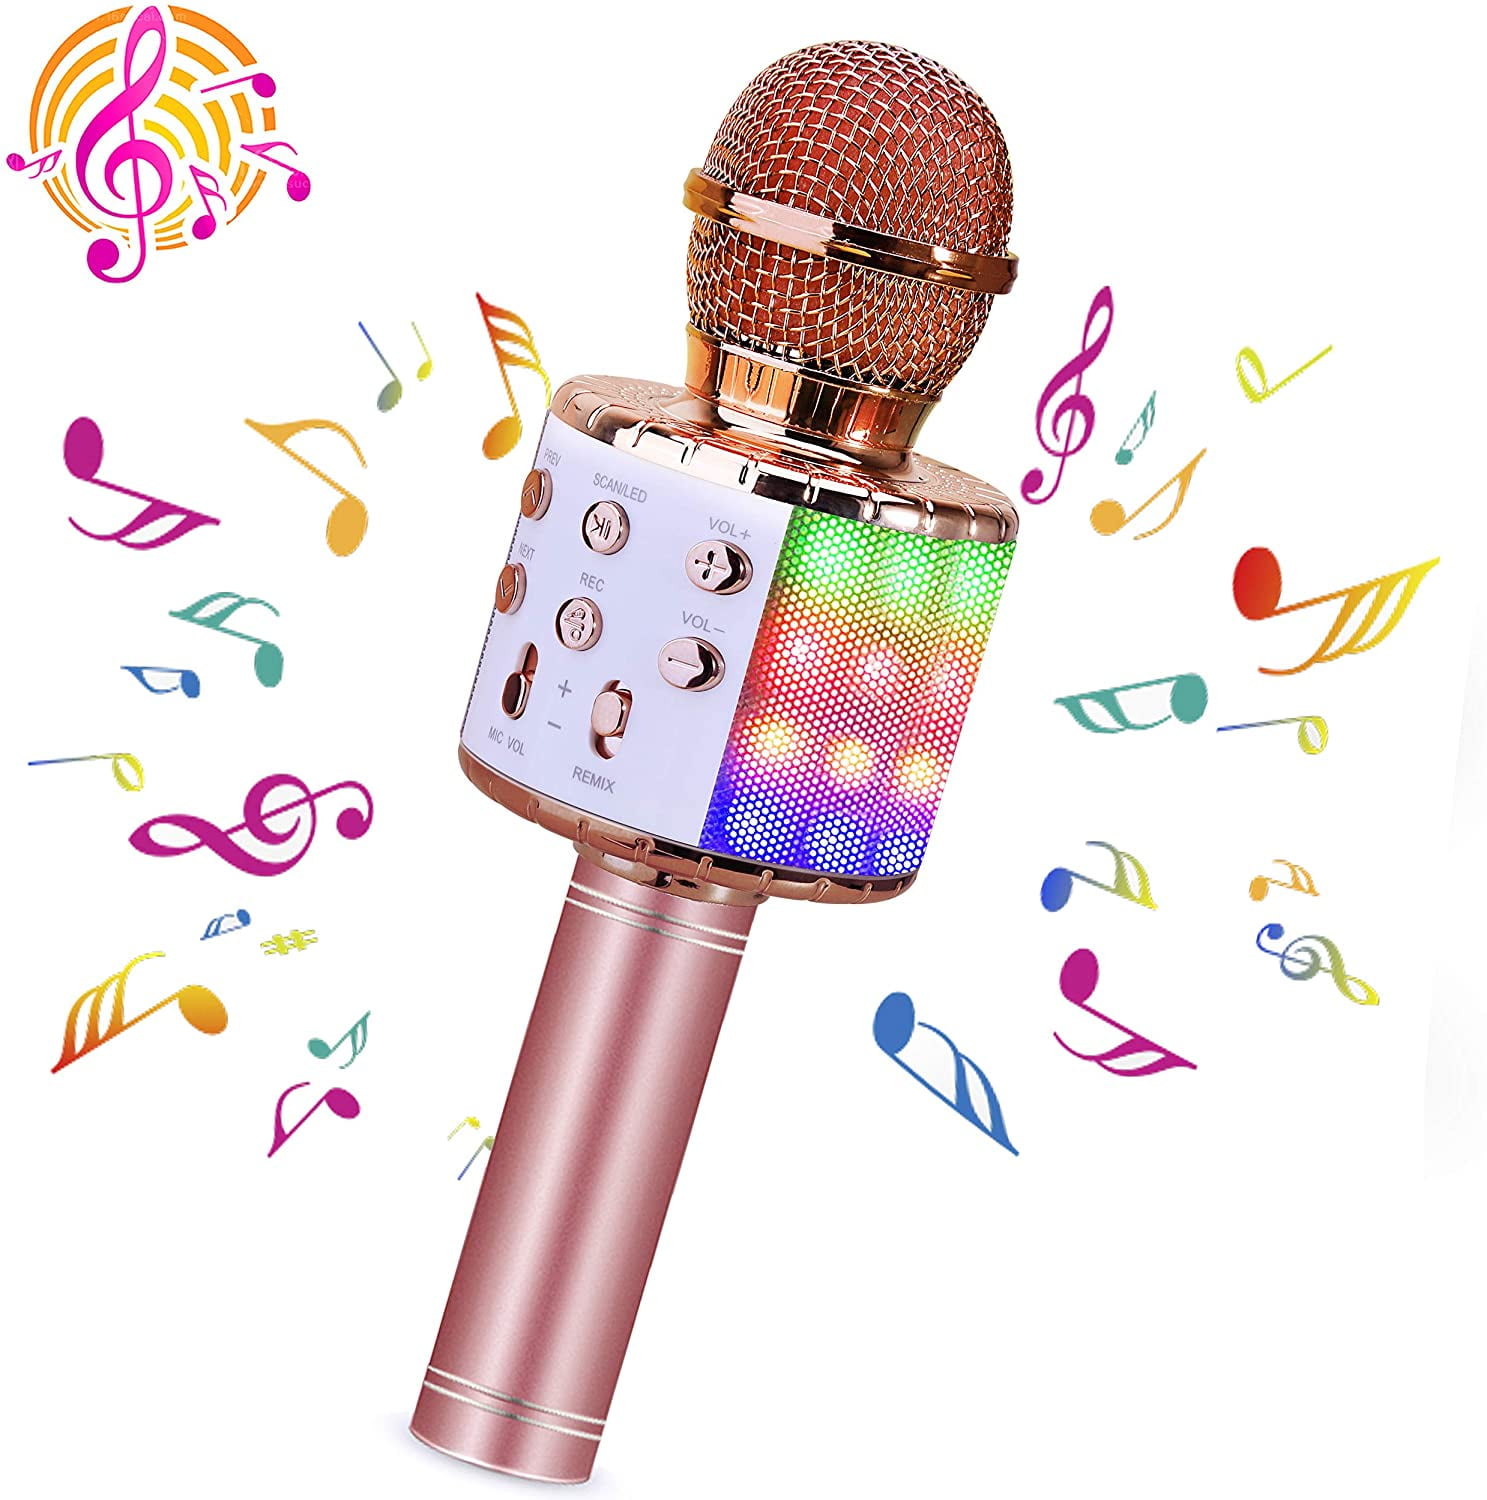 Neewer Wireless Bluetooth Karaoke Microphone Black+White Portable Handheld Karaoke Mic with Speaker Phone Holder for Kids Adults Home Party for iPhone/Android/iPad/Sony/PC/Smartphone 